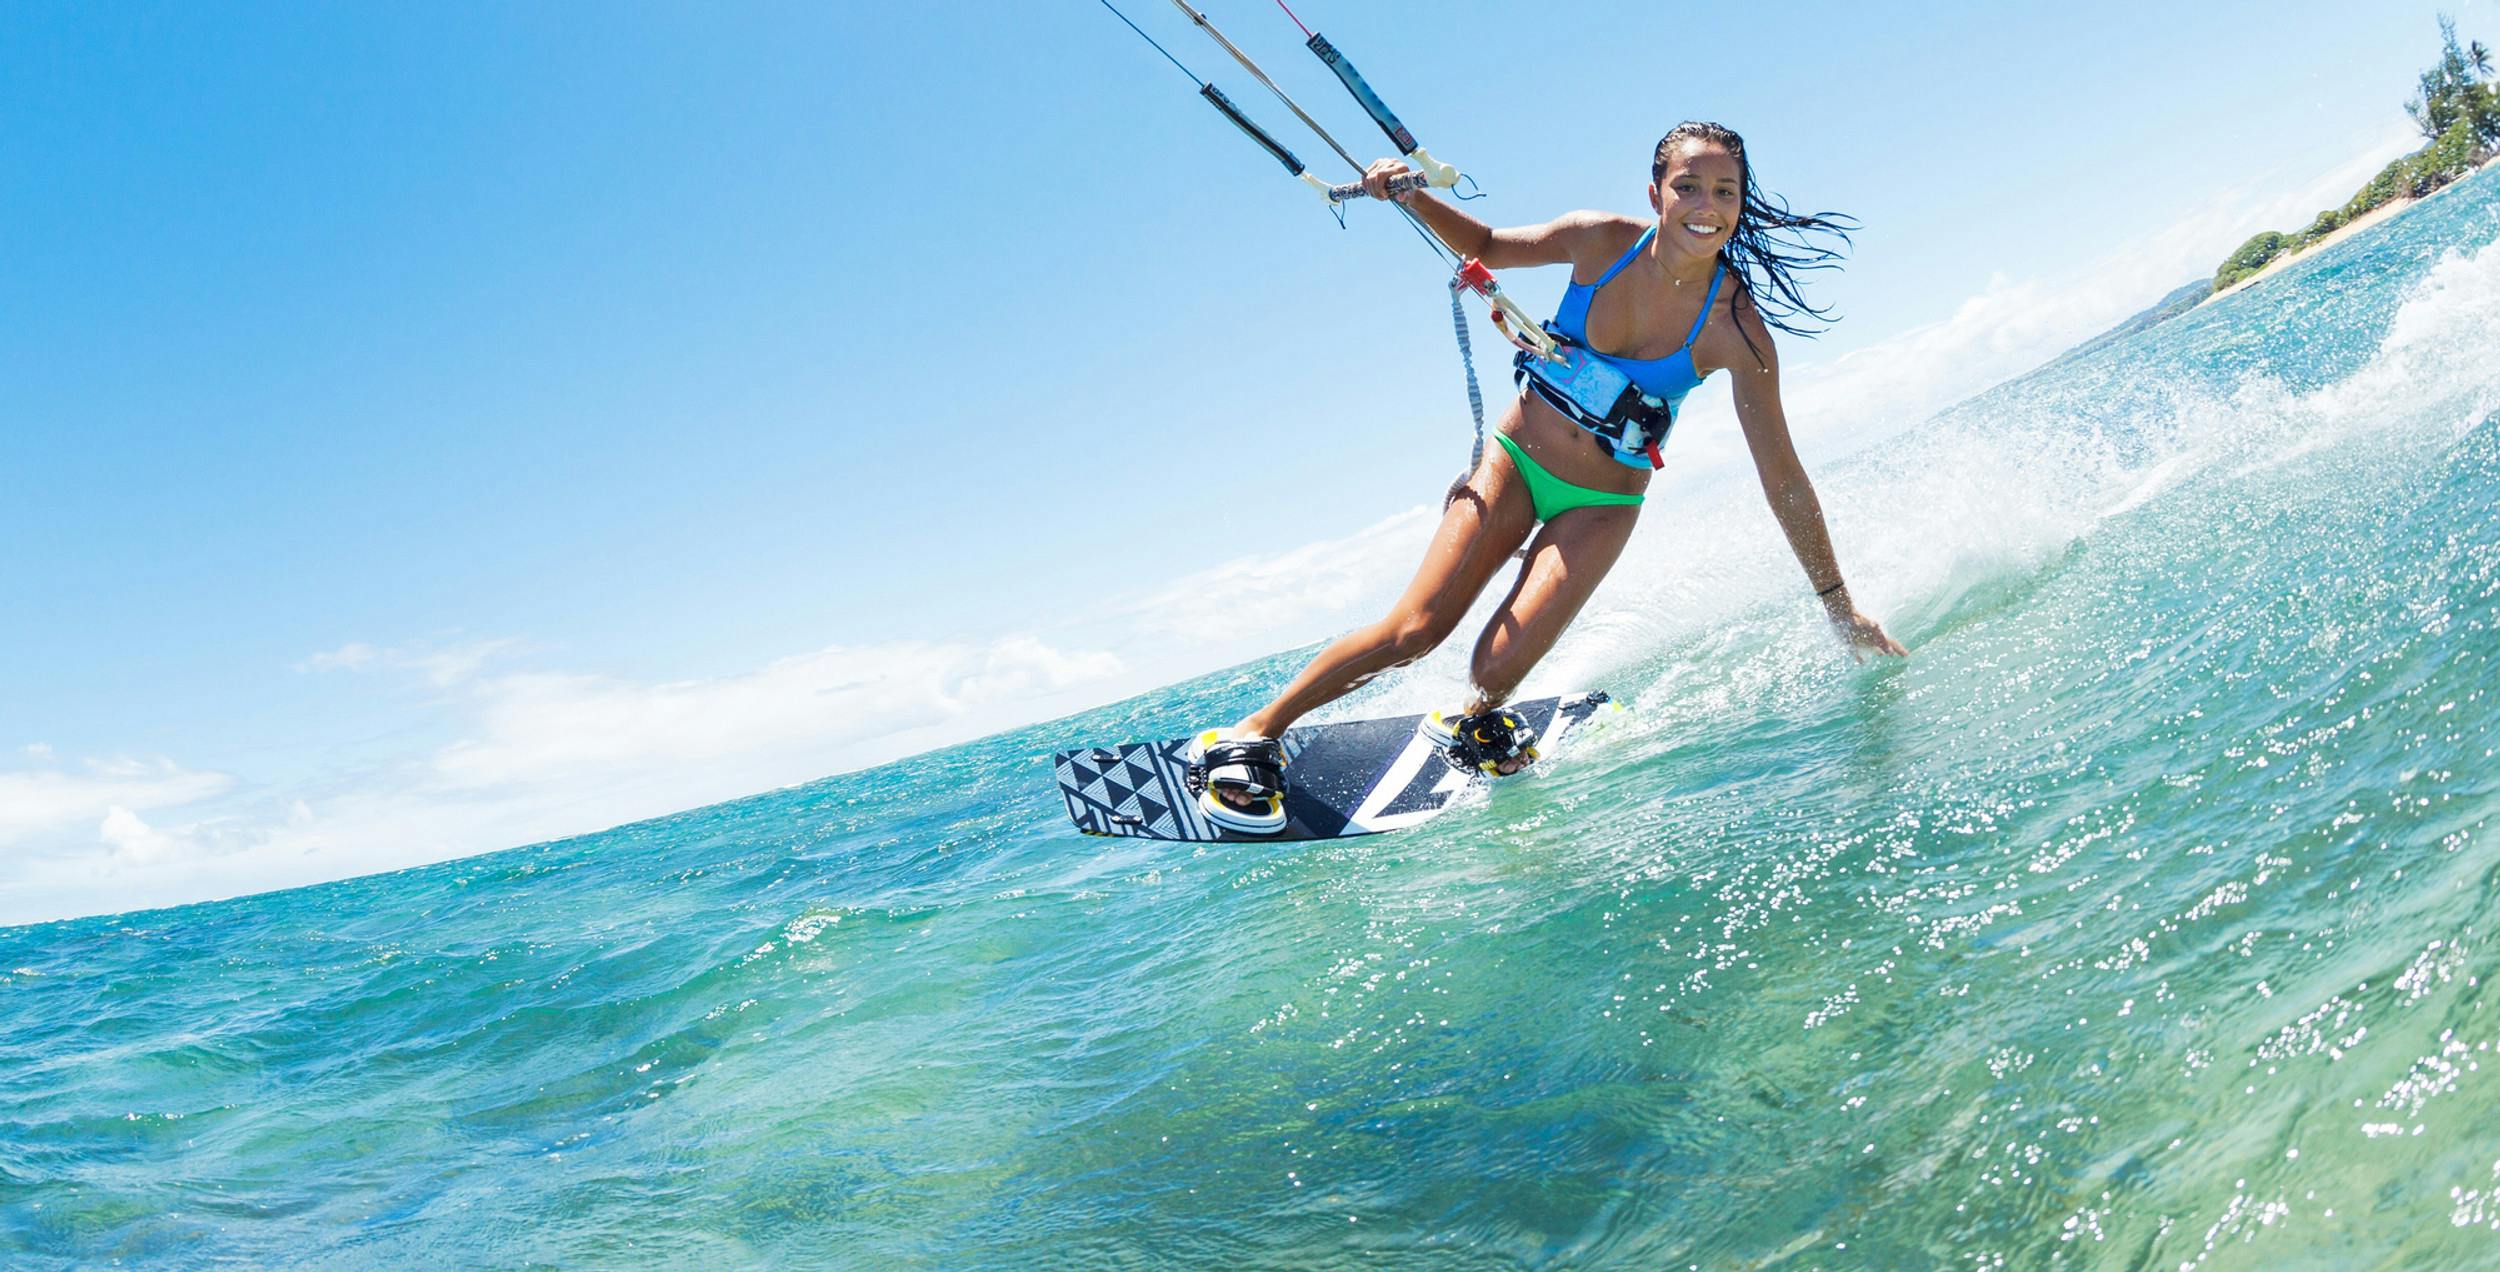 How Much Does It Cost To Get Started With Kitesurfing?